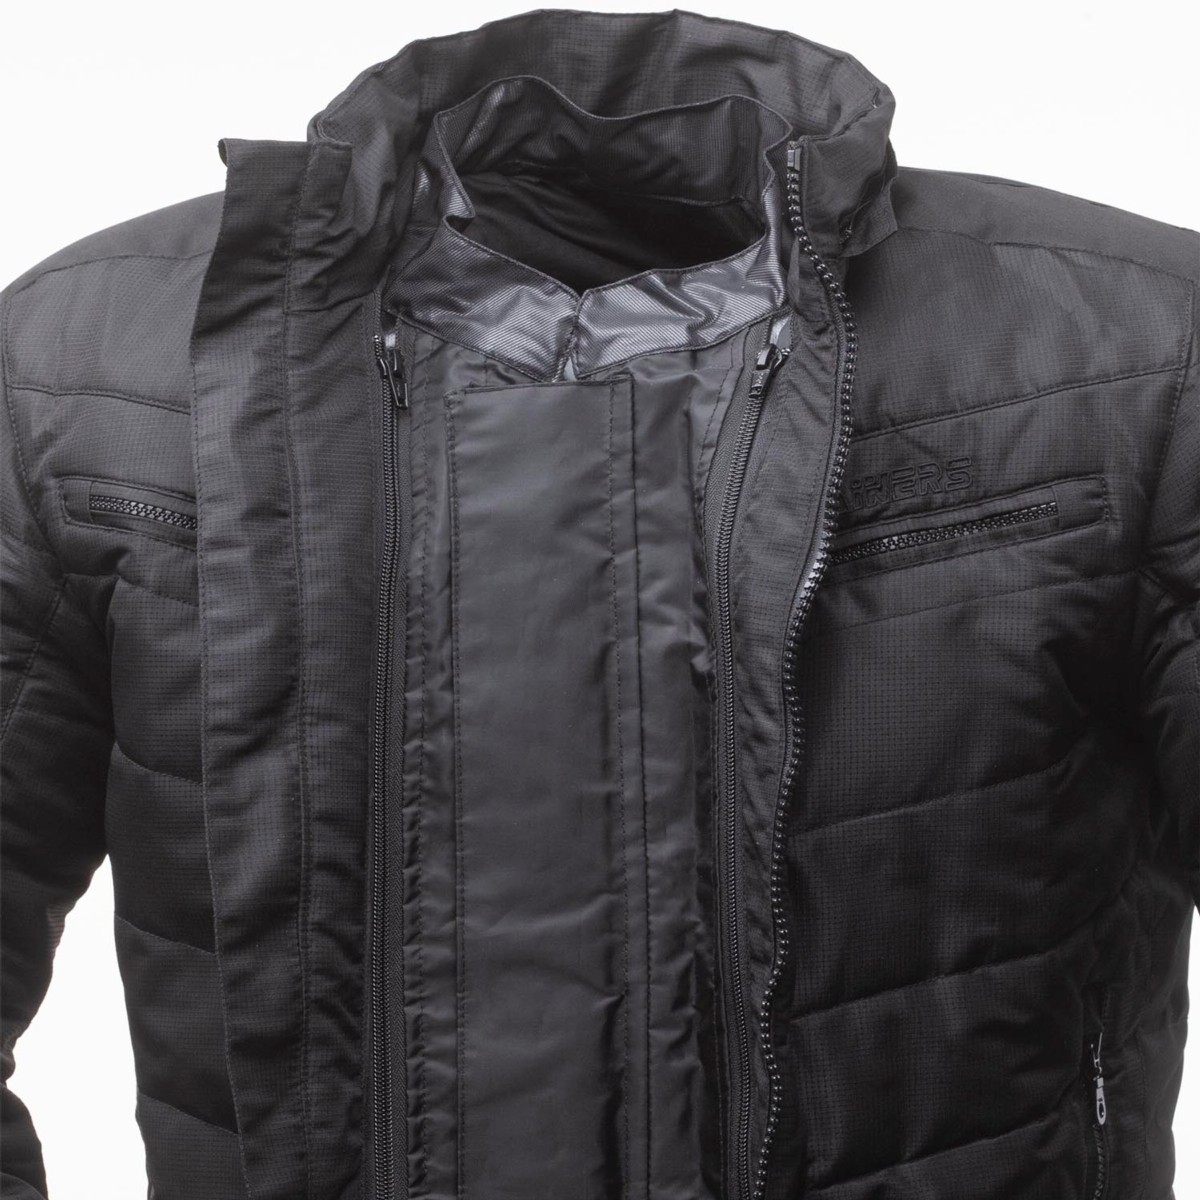 Chaqueta RAINERS DYLAN NEGRA INVIERNO Impermeable 4